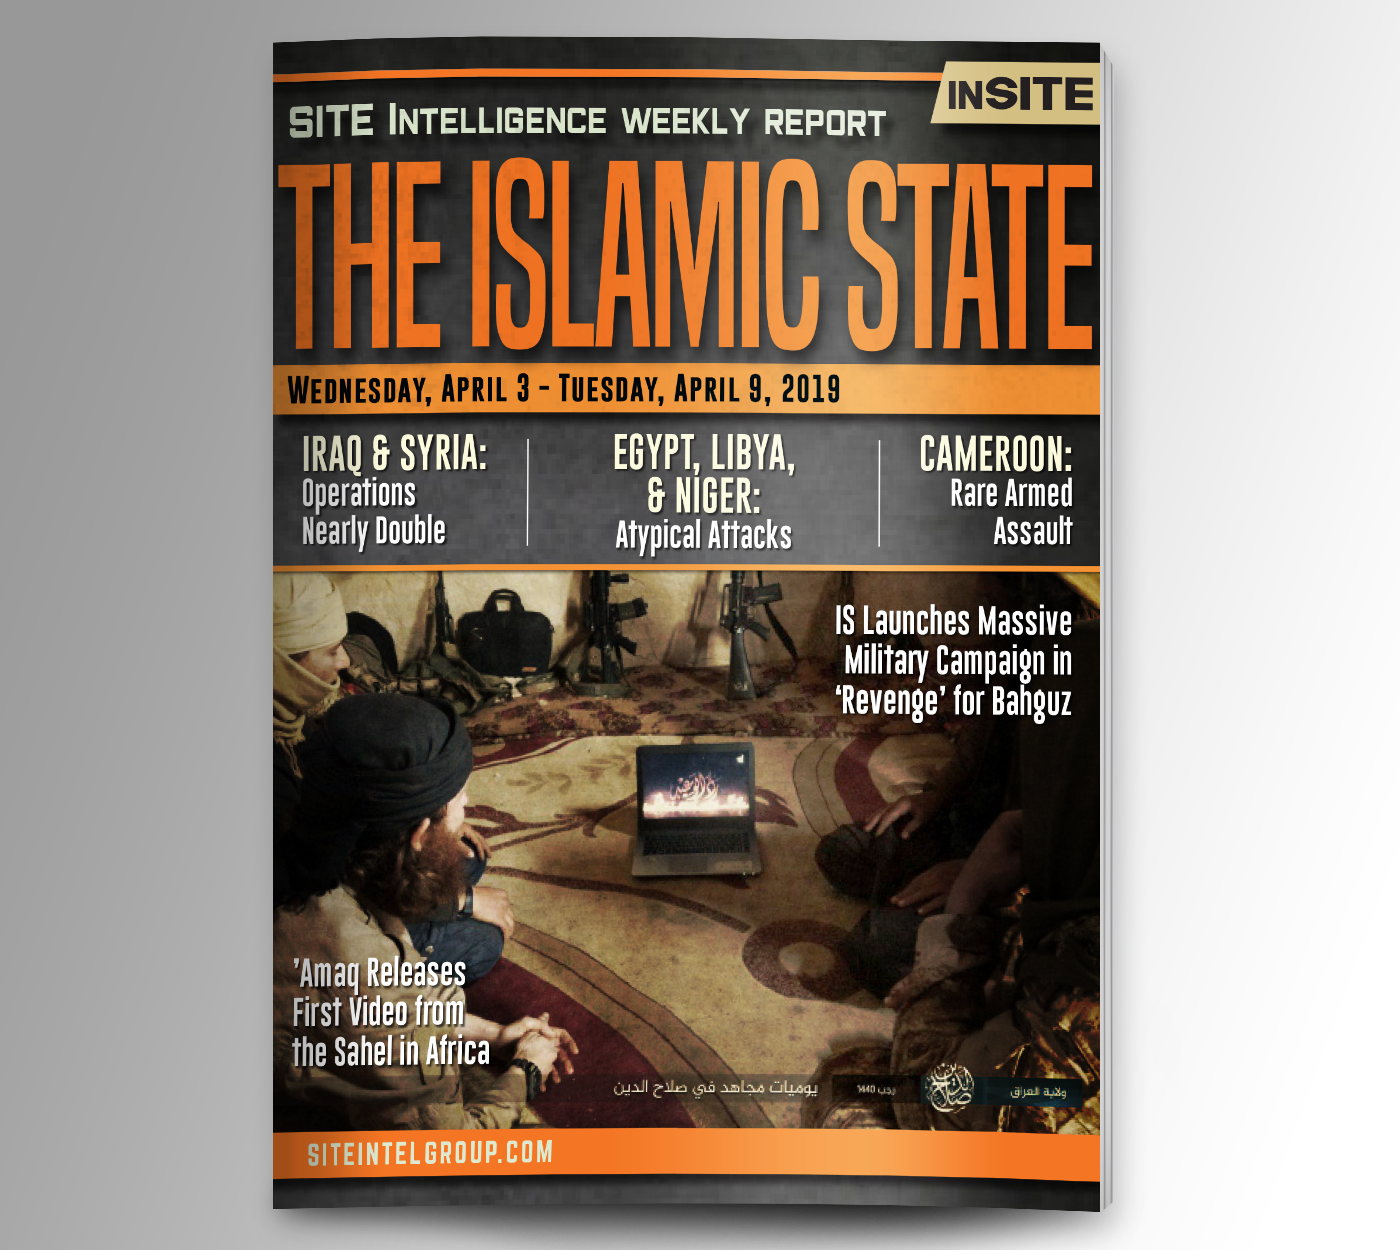 Weekly inSITE on the Islamic State for April 3-9, 2019